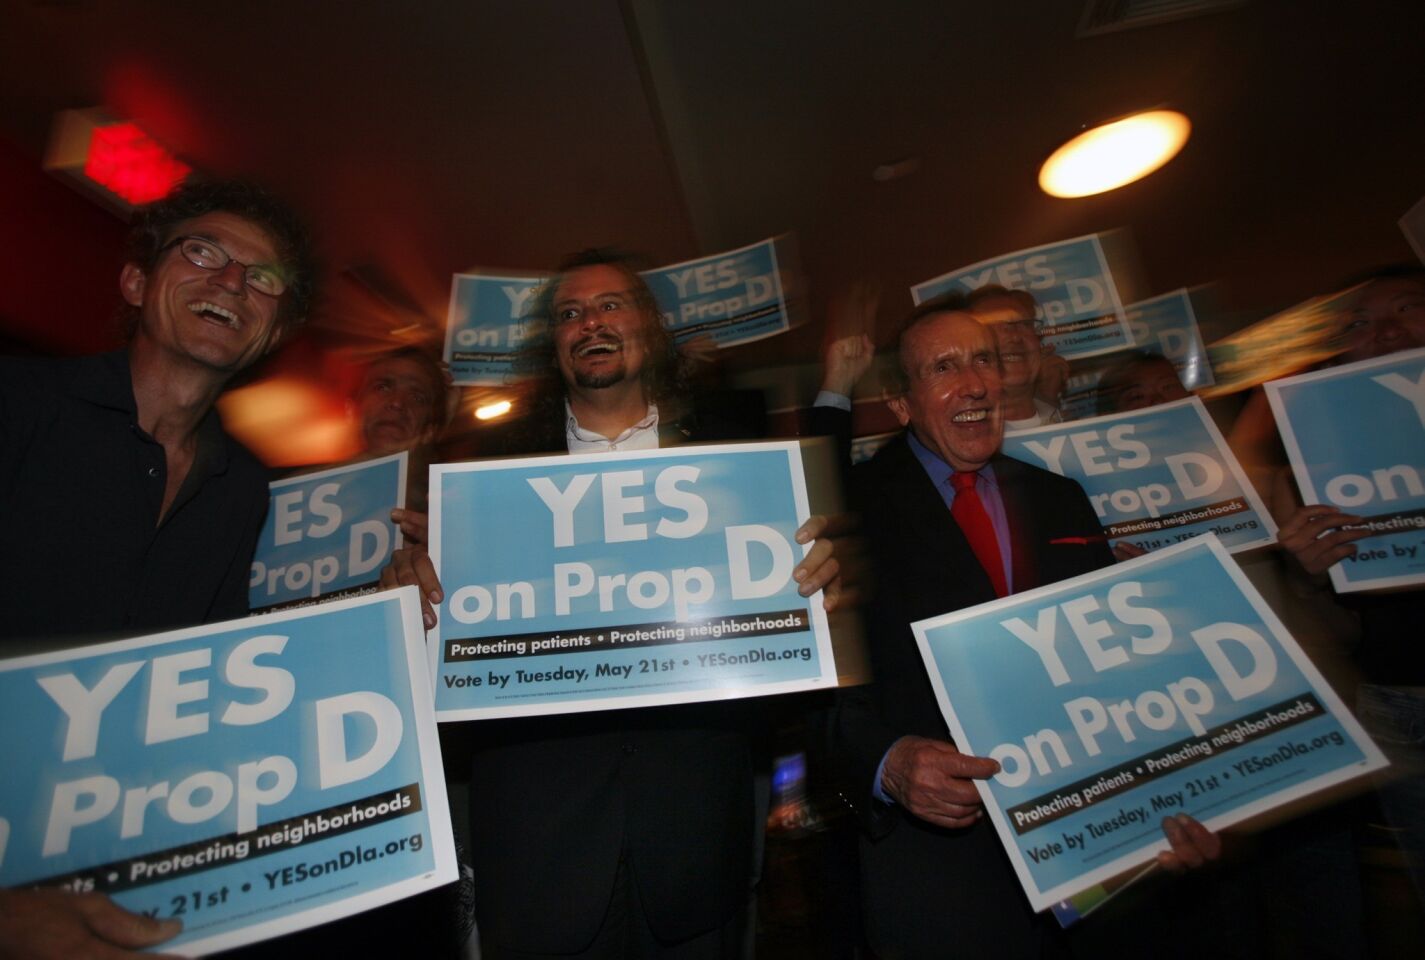 Supporters of Proposition D celebrate its early lead at the Lucky Strikes bowling alley in Hollywood. The measure would limit medical marijuana dispensaries to those that existed before the adoption of a failed 2007 moratorium on new pot shops.